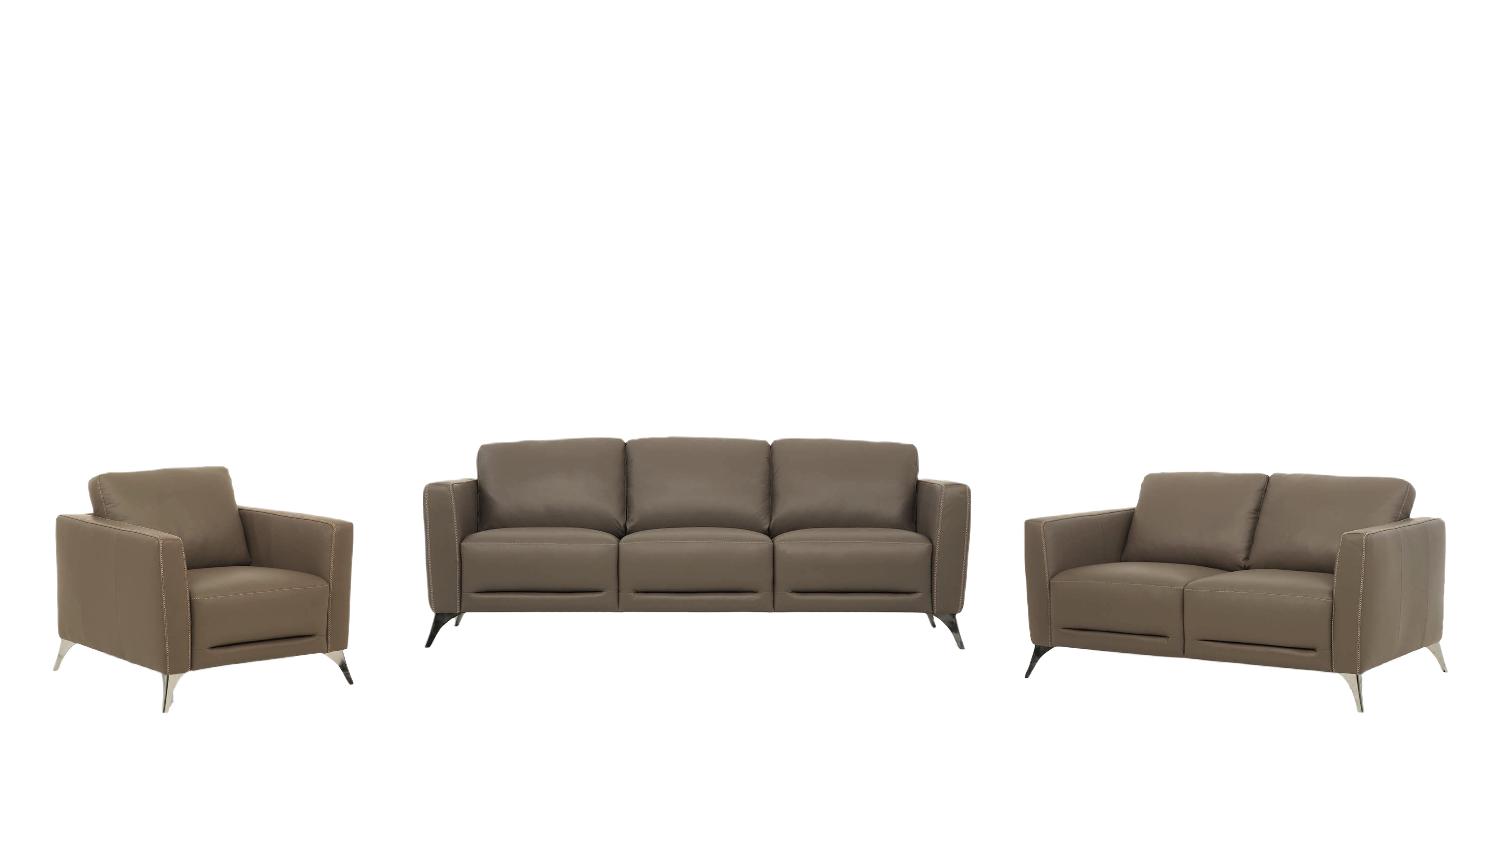 Transitional Sofa Loveseat and Chair Set Malaga 55000-3pcs in Brown Leather